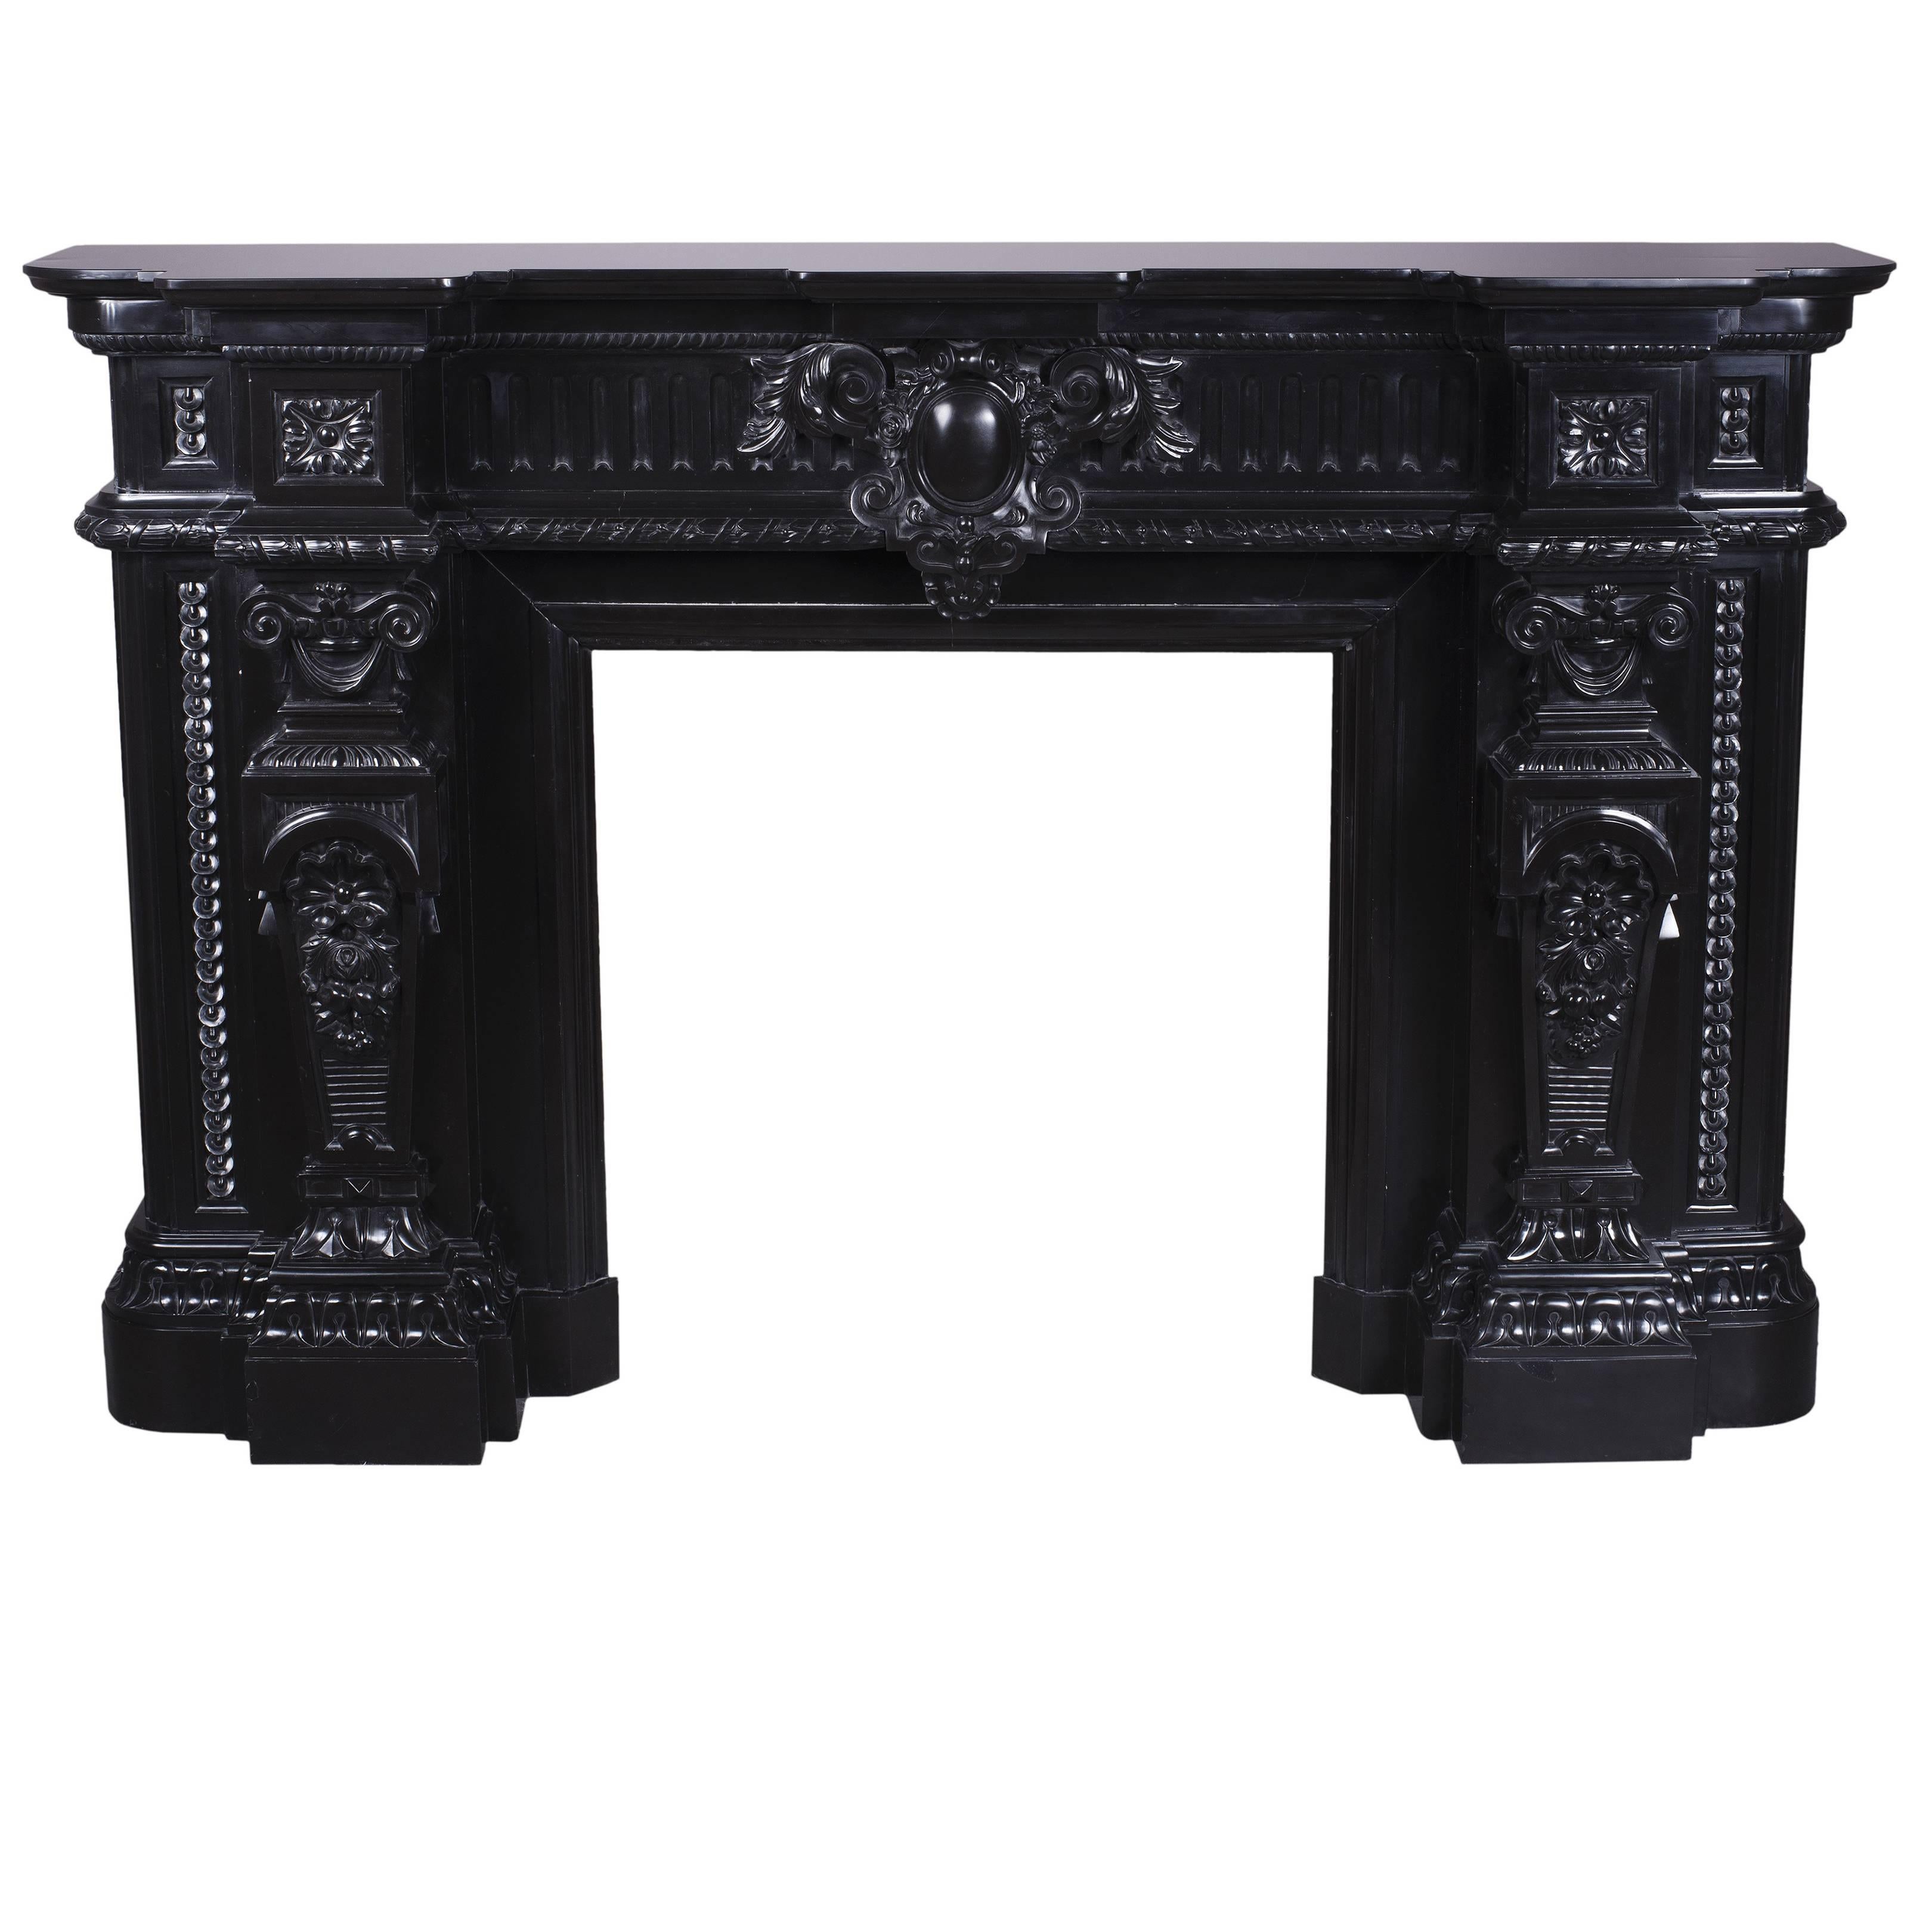 Rare Napoleon III Style Antique Fireplace in Belgian Black Marble, Rich Decor For Sale